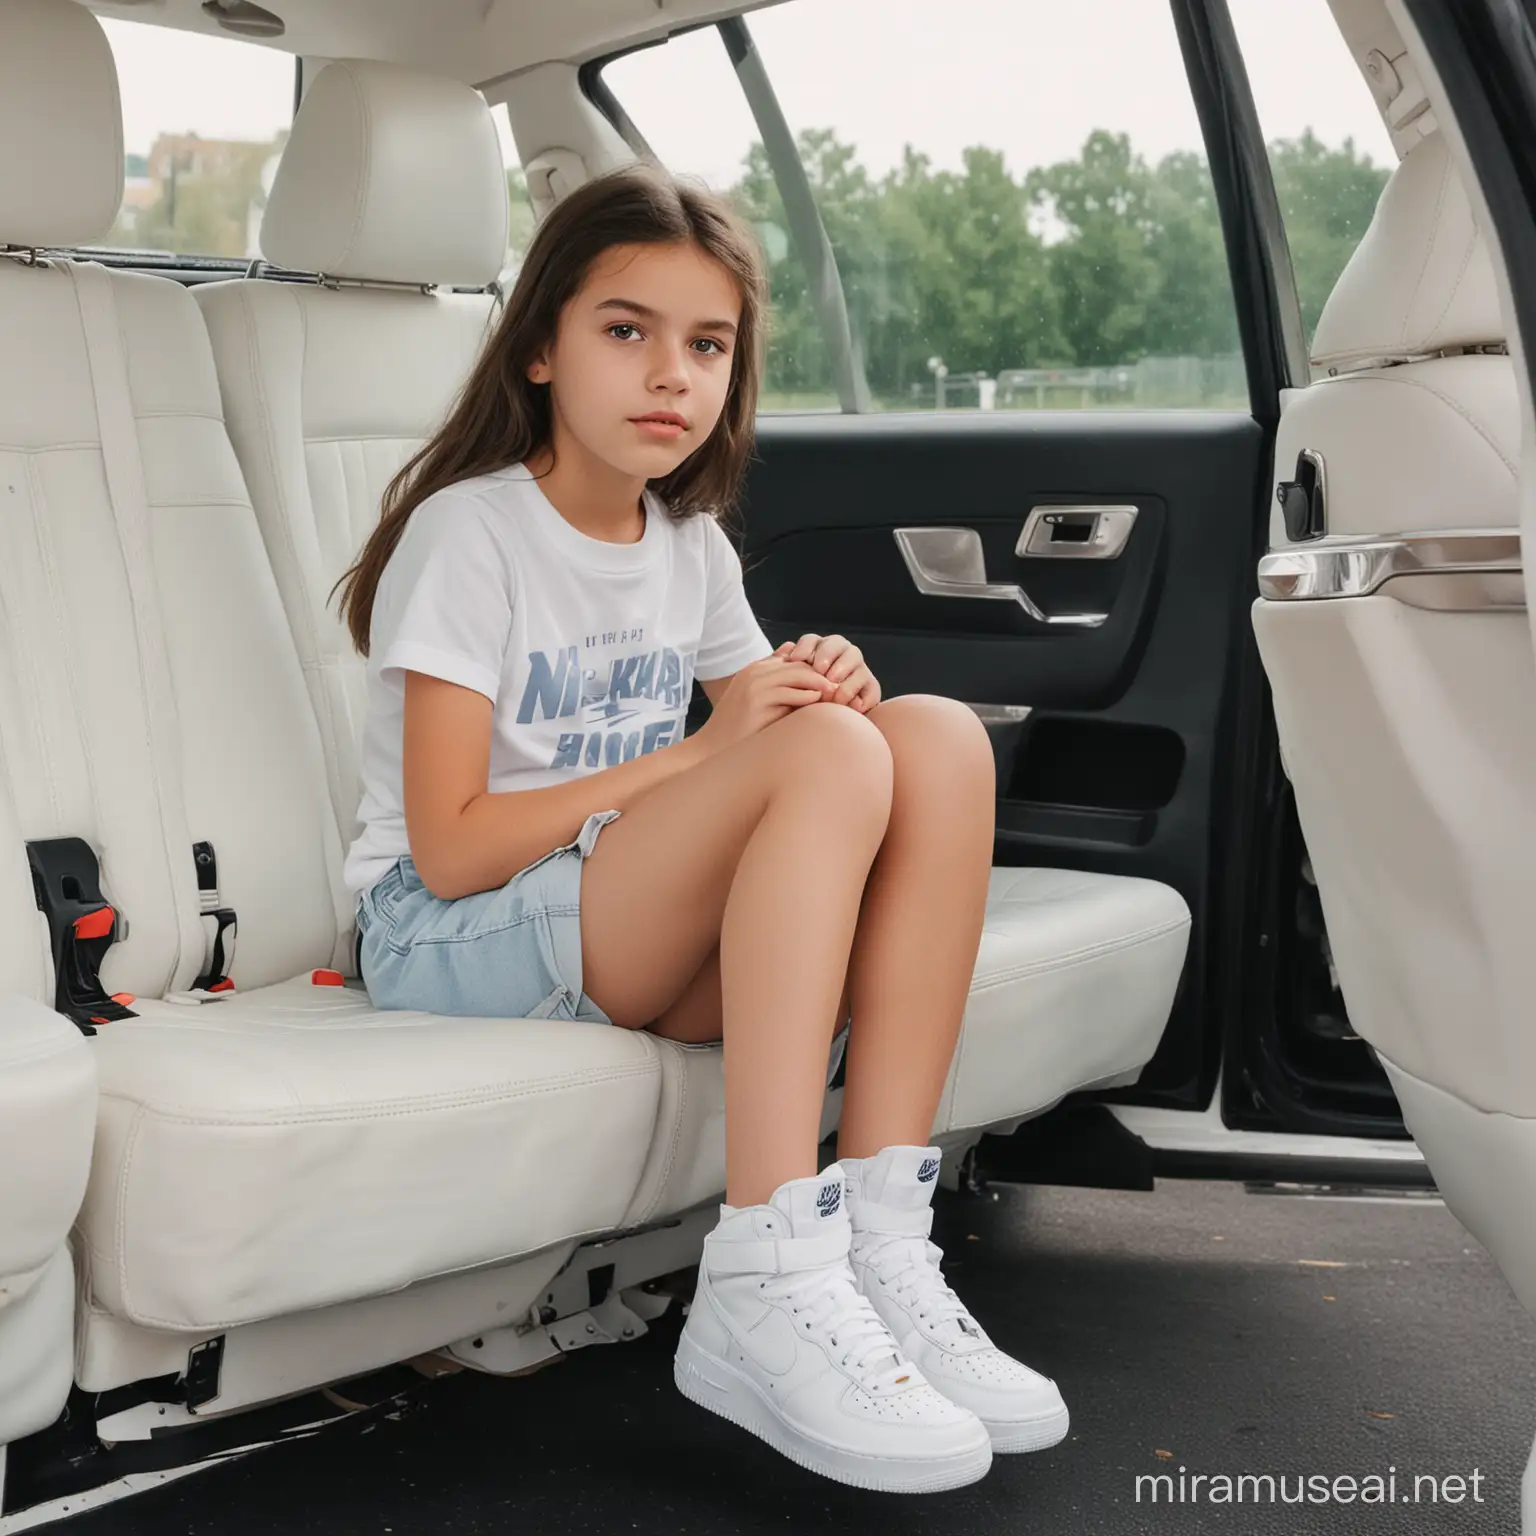 Teen Girl in White Nike Air Force High Shoes Sitting in Front Passenger Seat